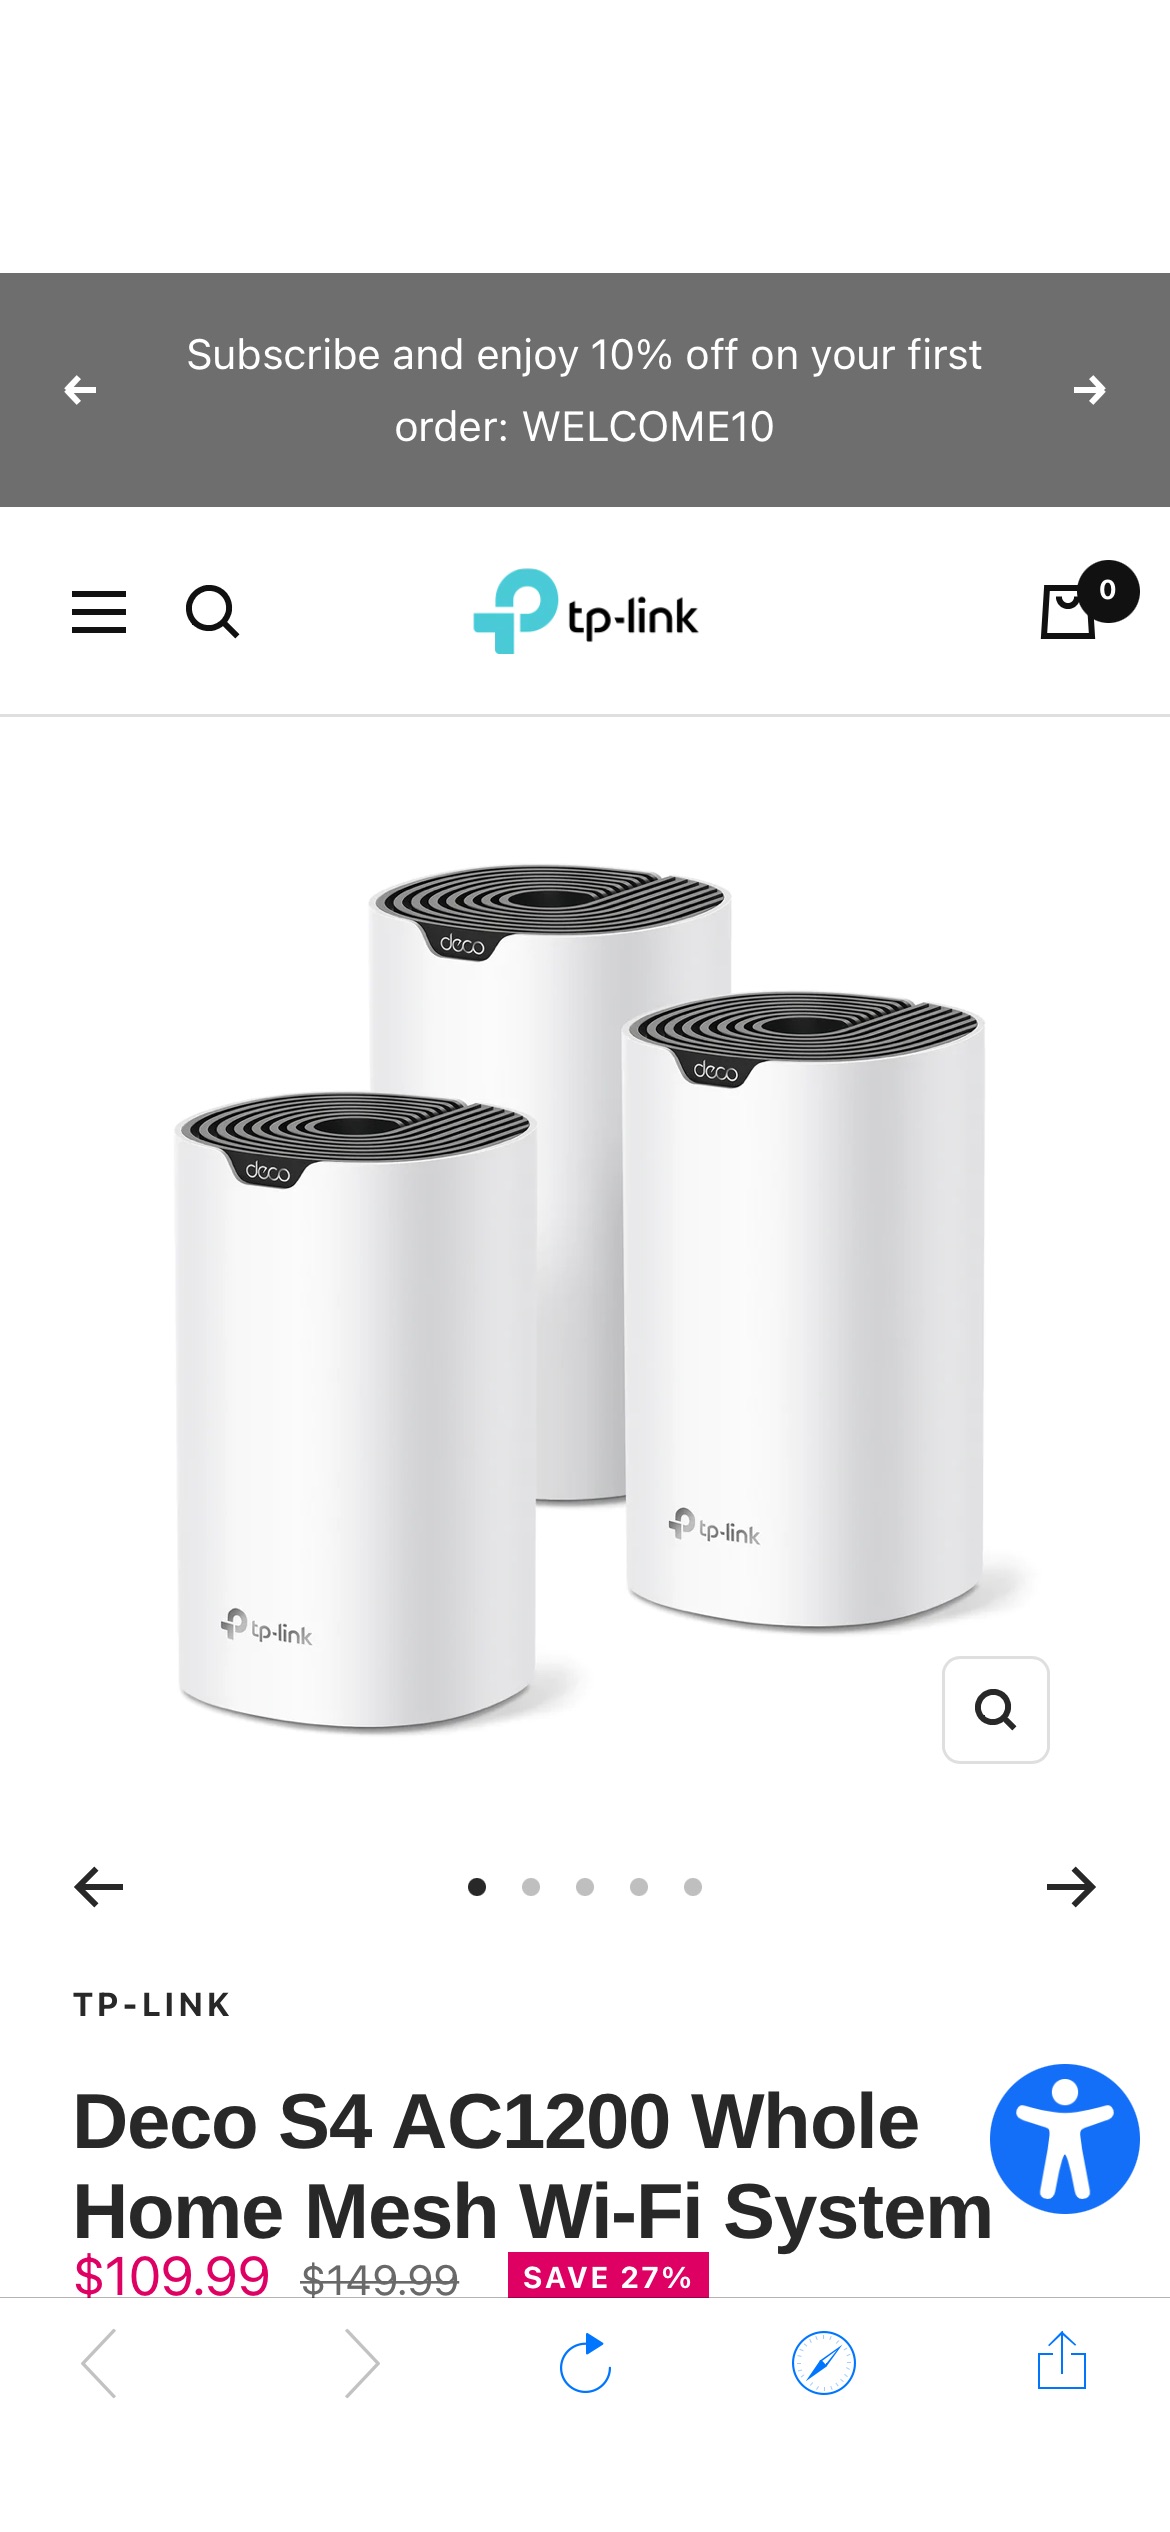 TP-link路由器Deco S4 AC1200 Whole Home Mesh Wi-Fi System